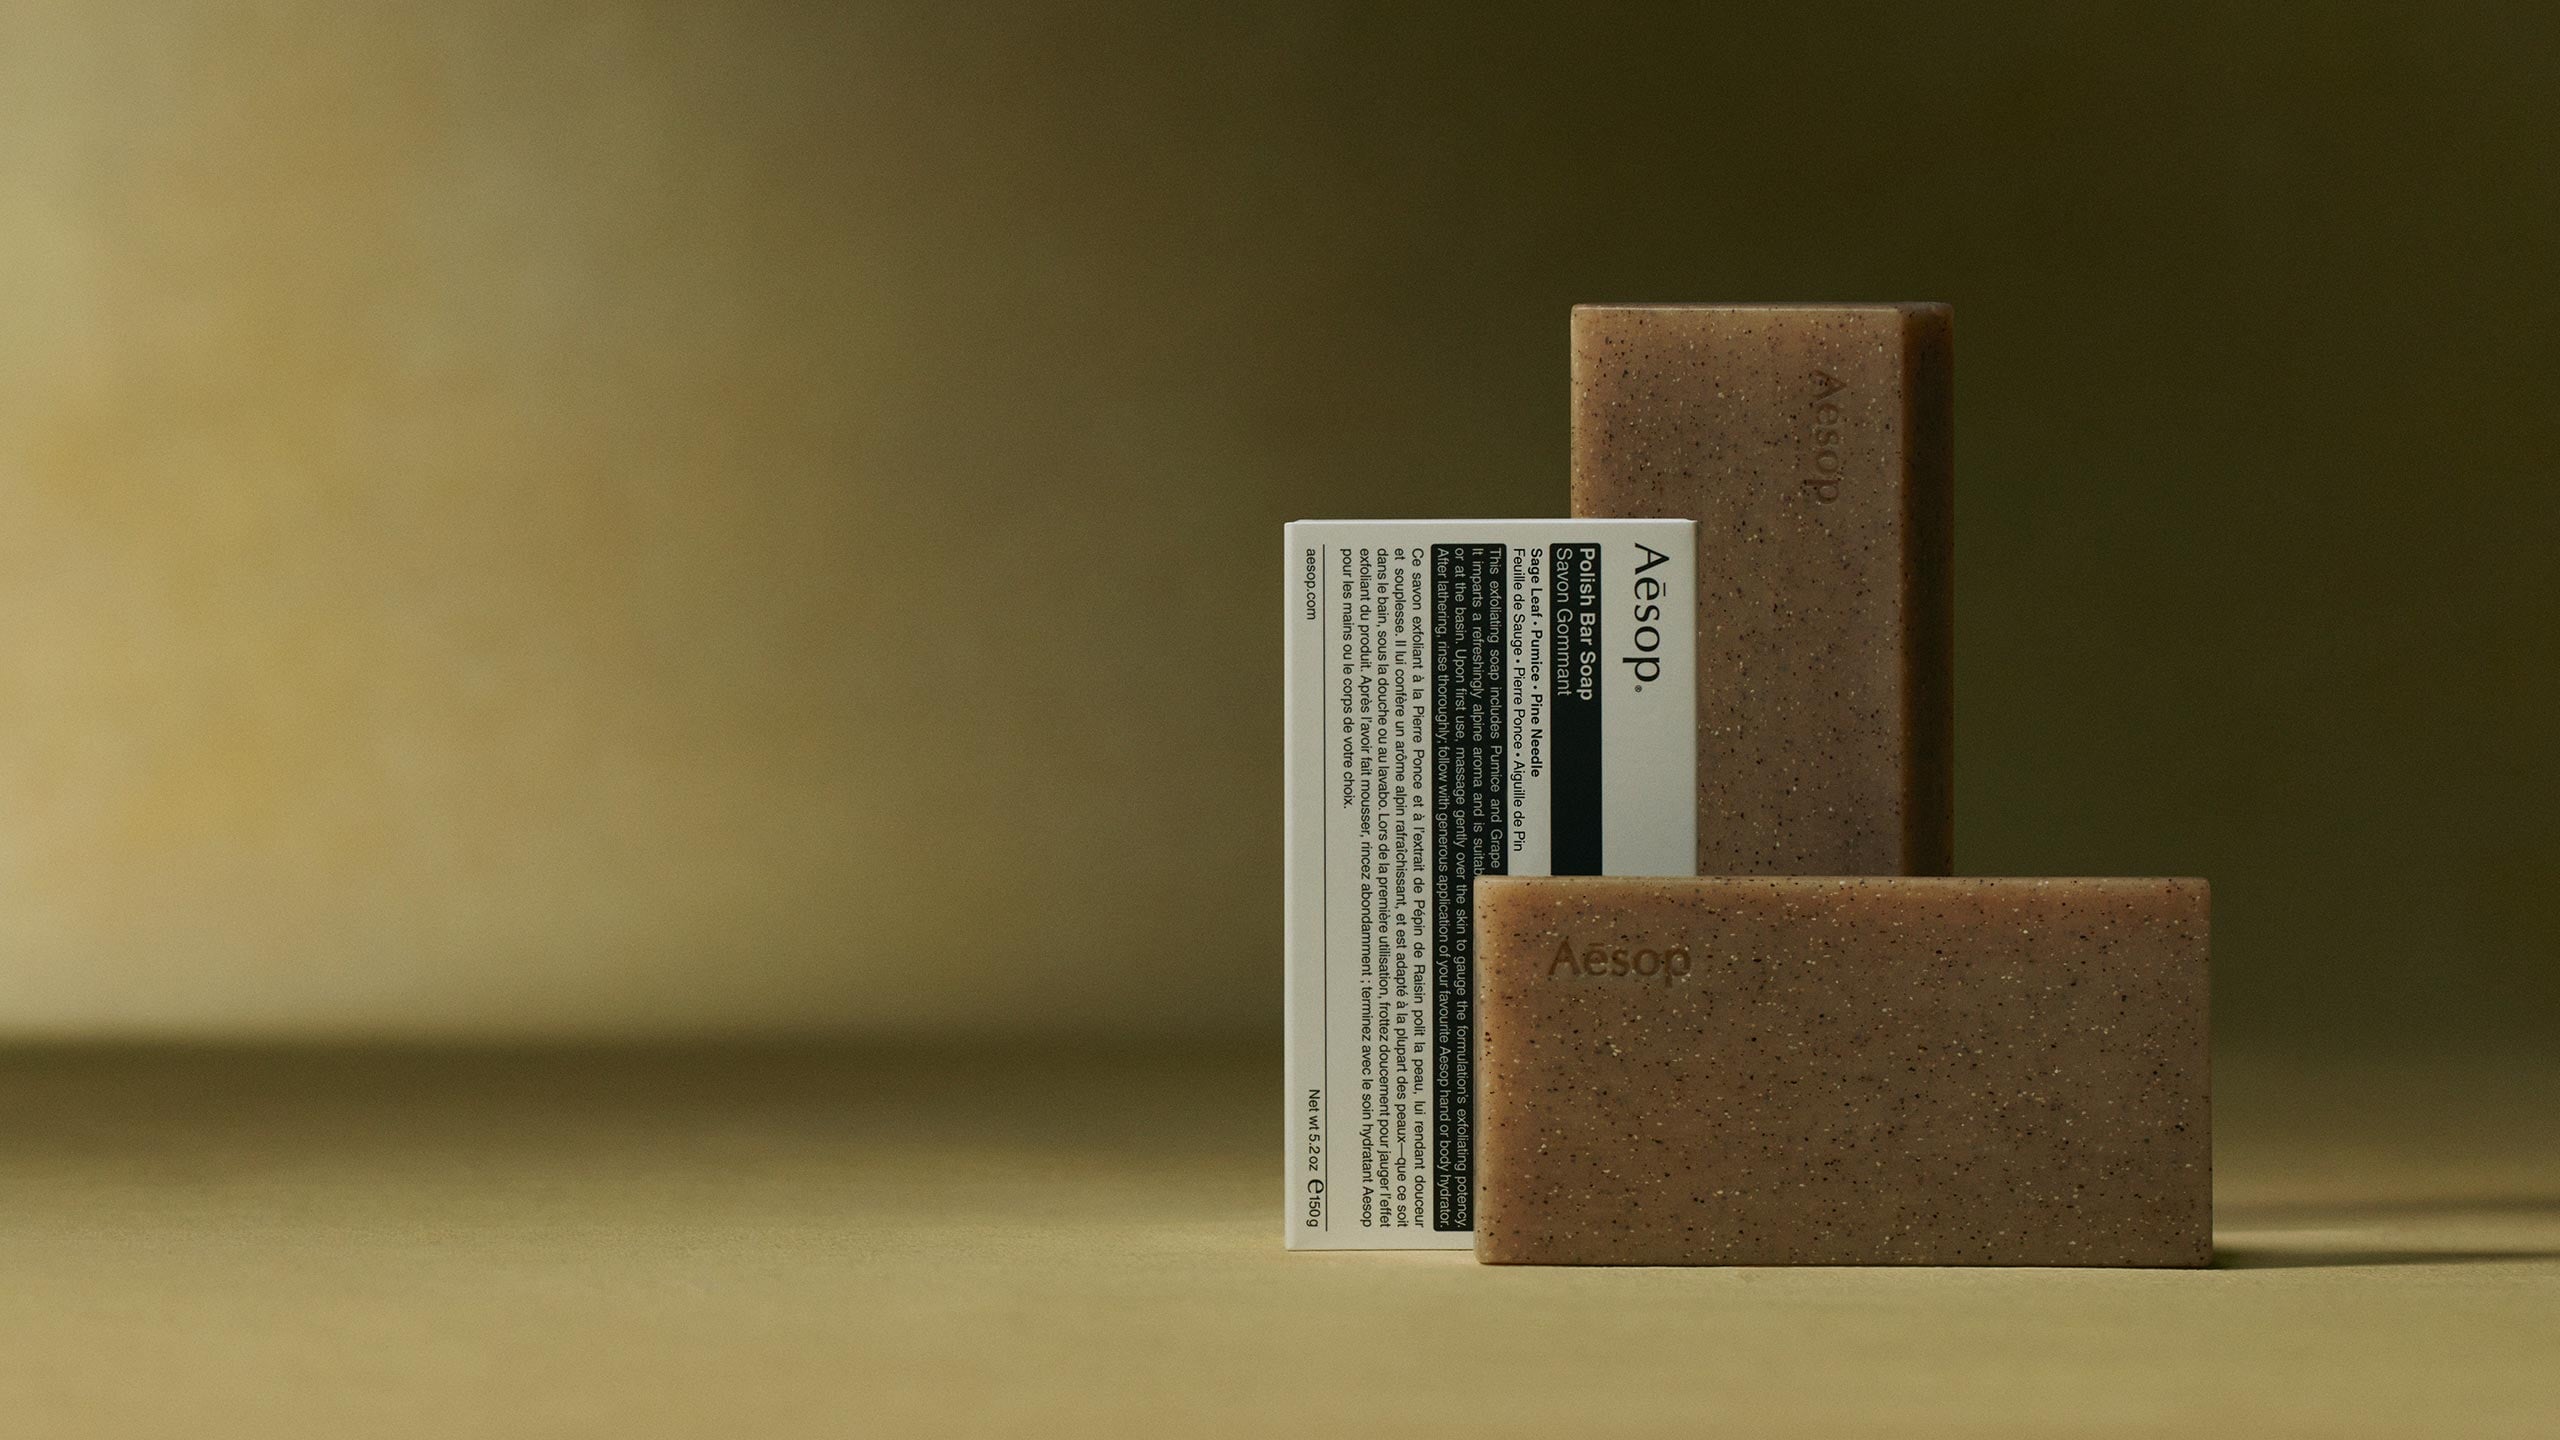 Aesop polish bar soap and its packaging placed in front of green textured background